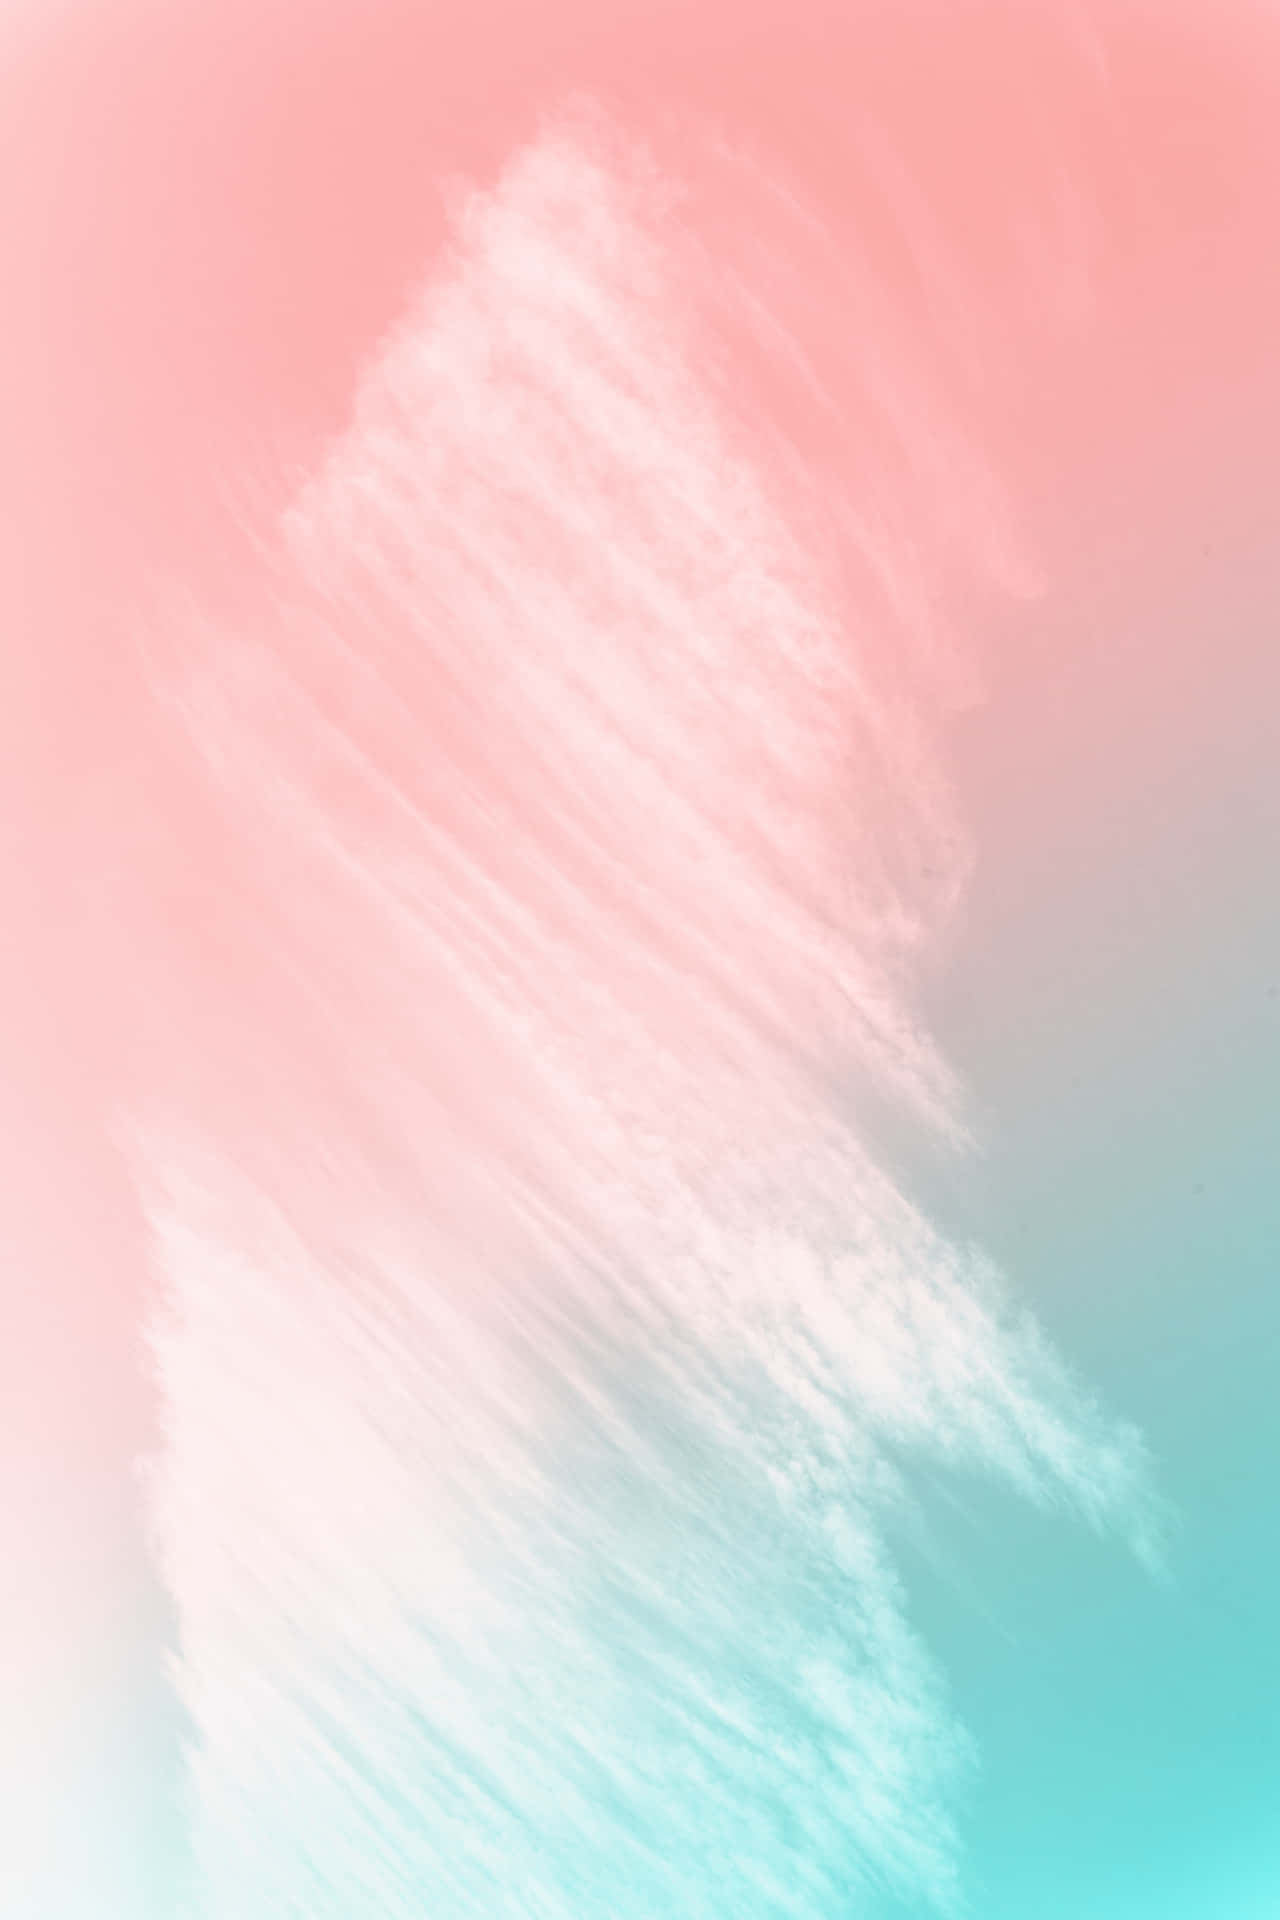 Colorful solid pastel background